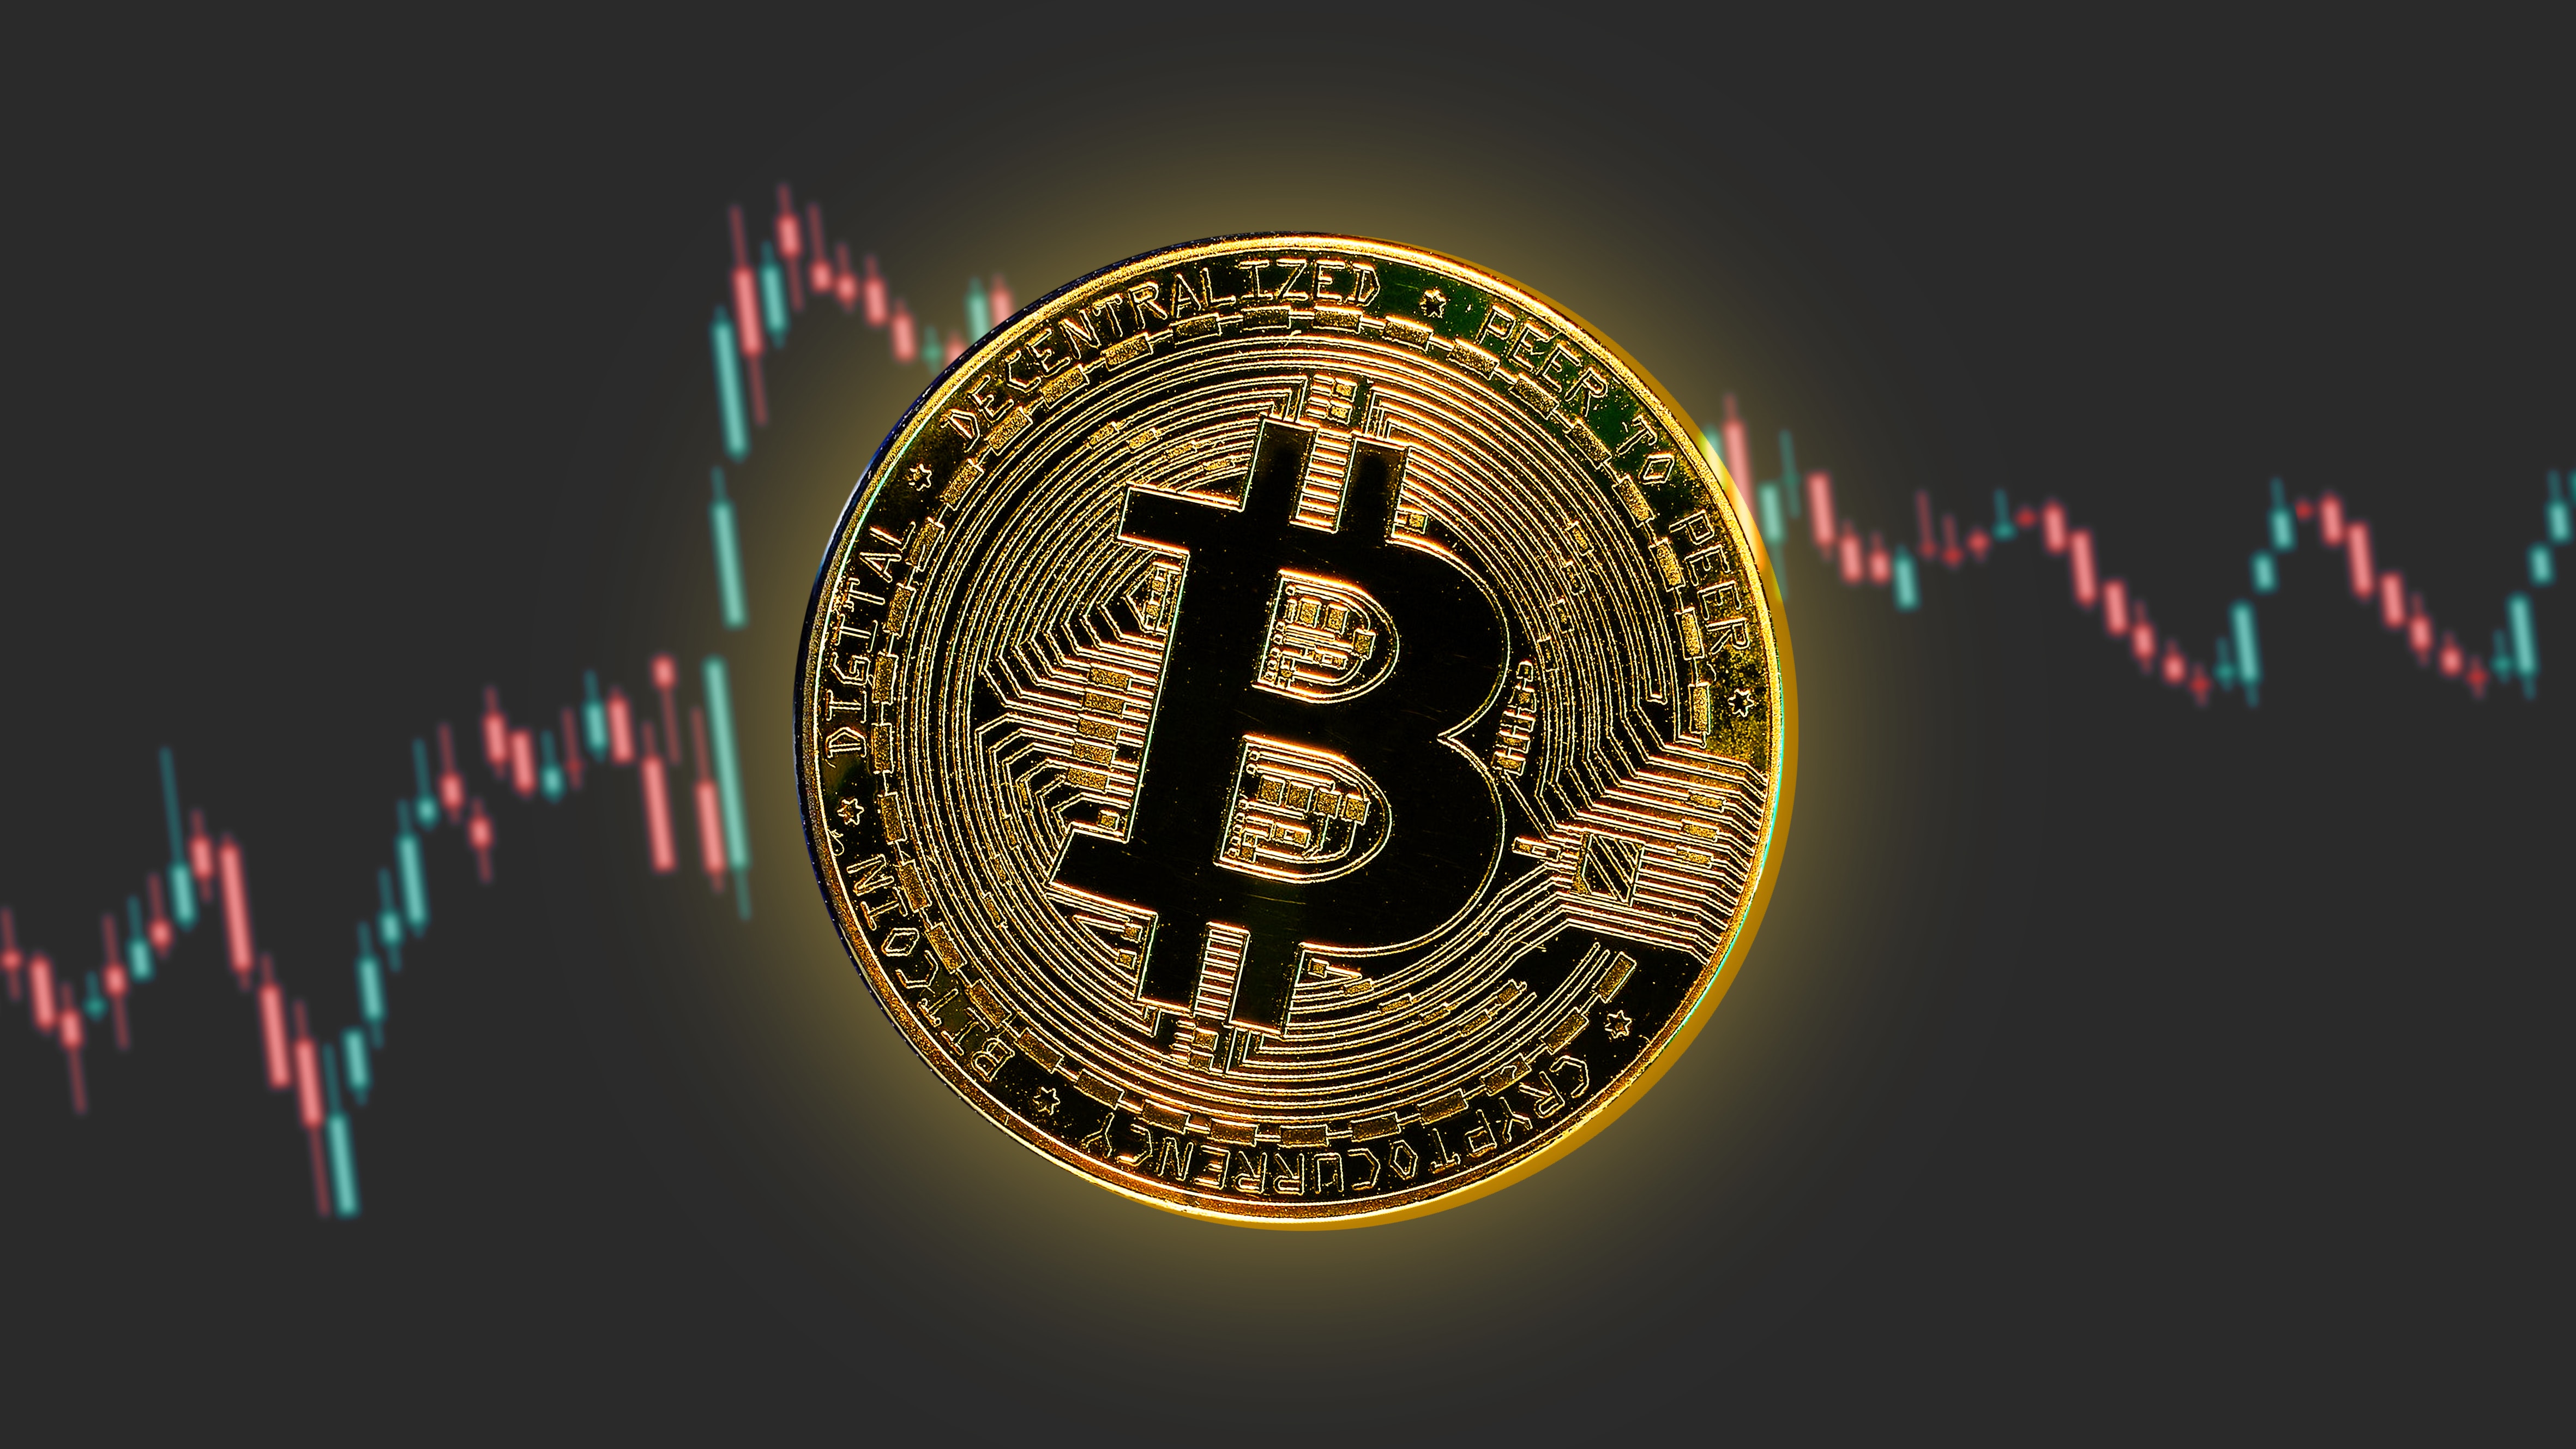 Will Bitcoin Show A Repeat Of The March Rebound?